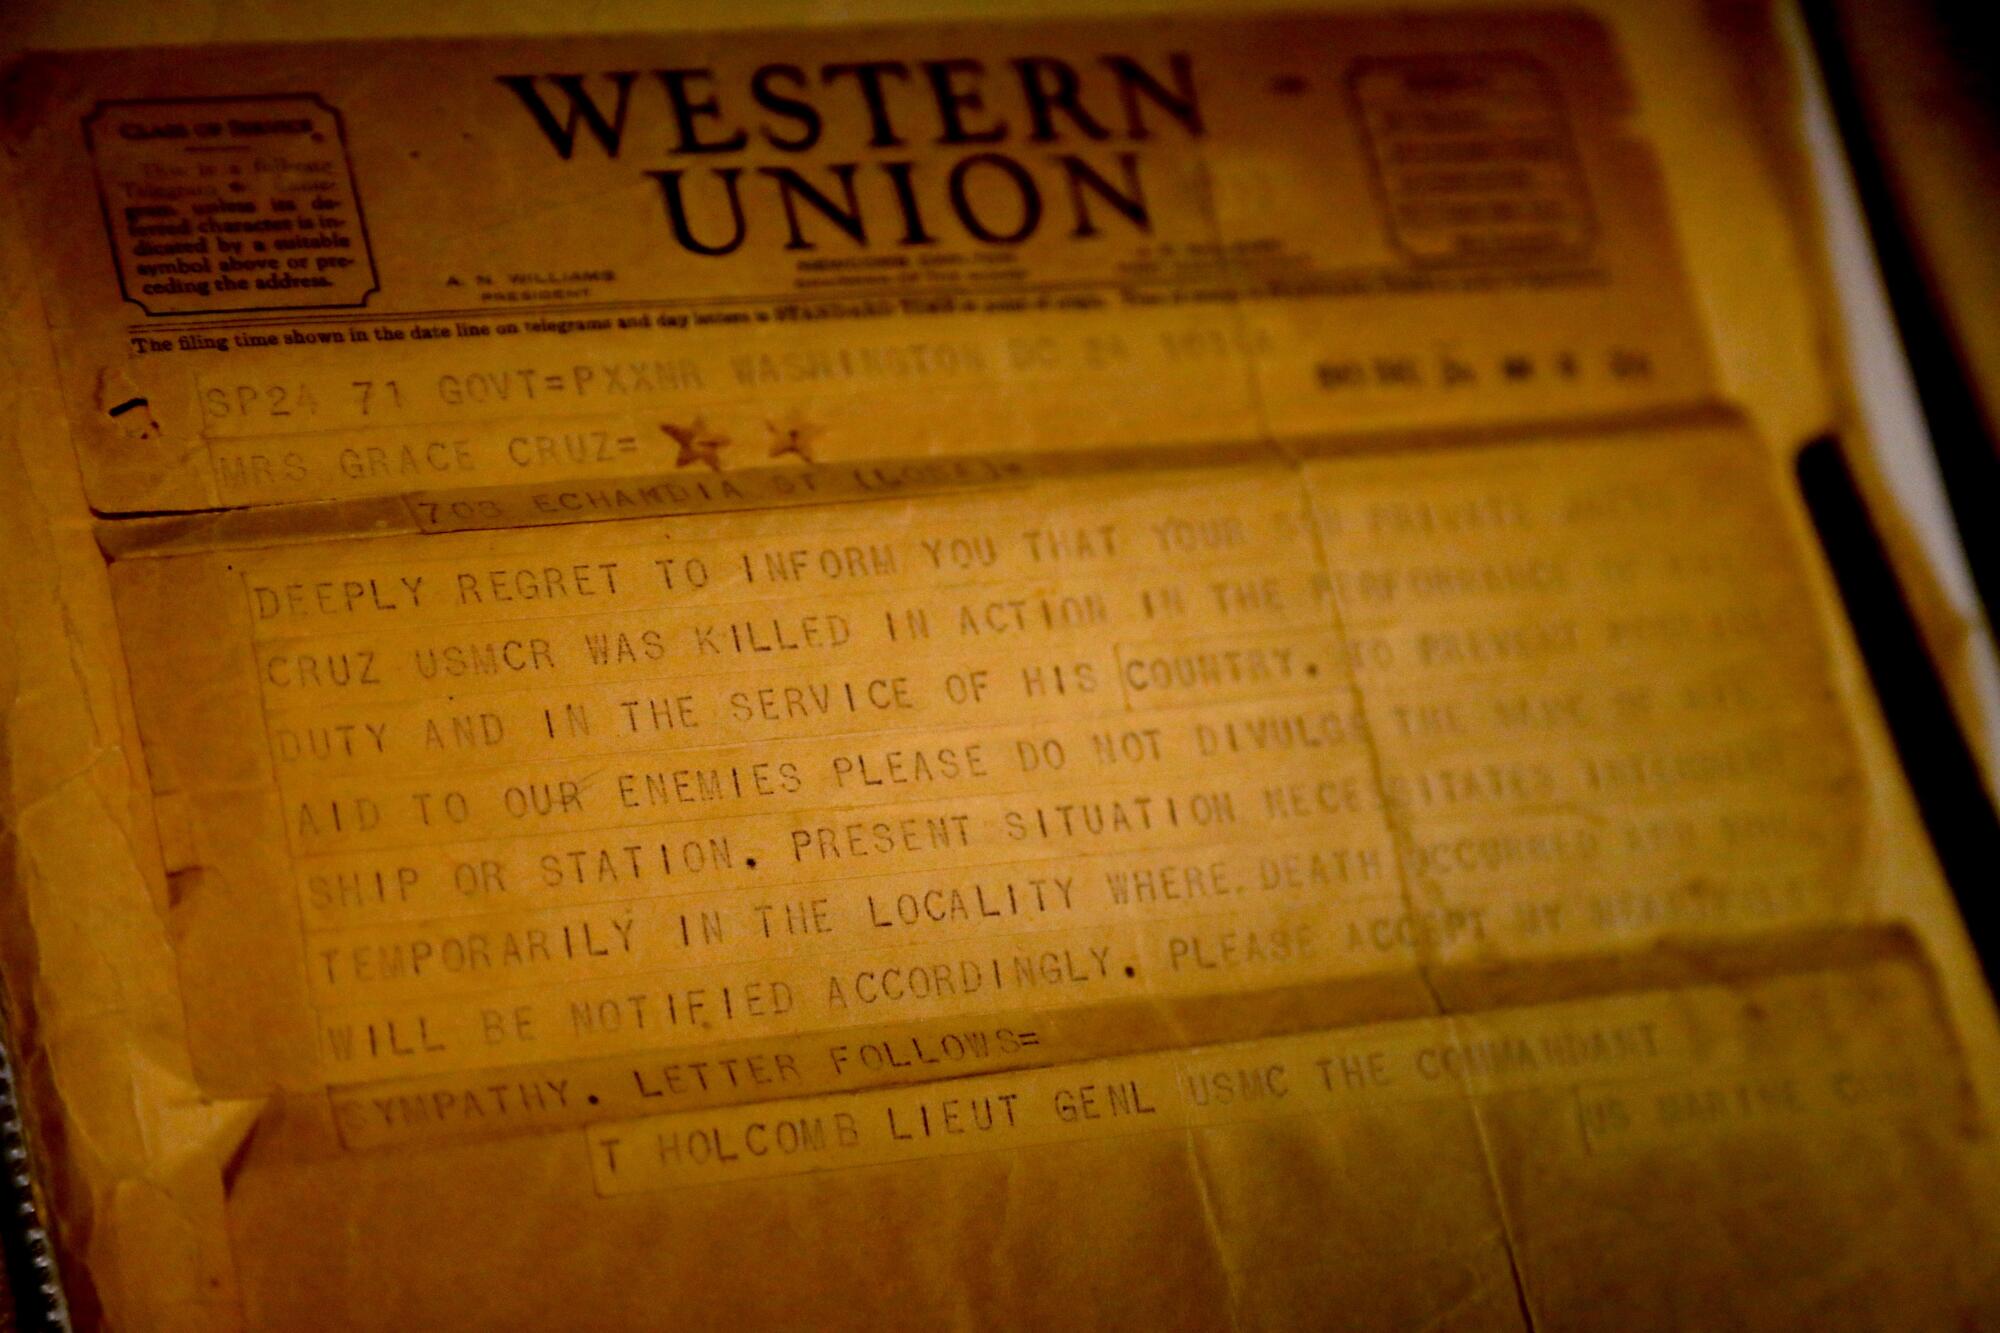 A Western Union telegram stating Jacob Cruz had been killed in battle while serving during World War II.